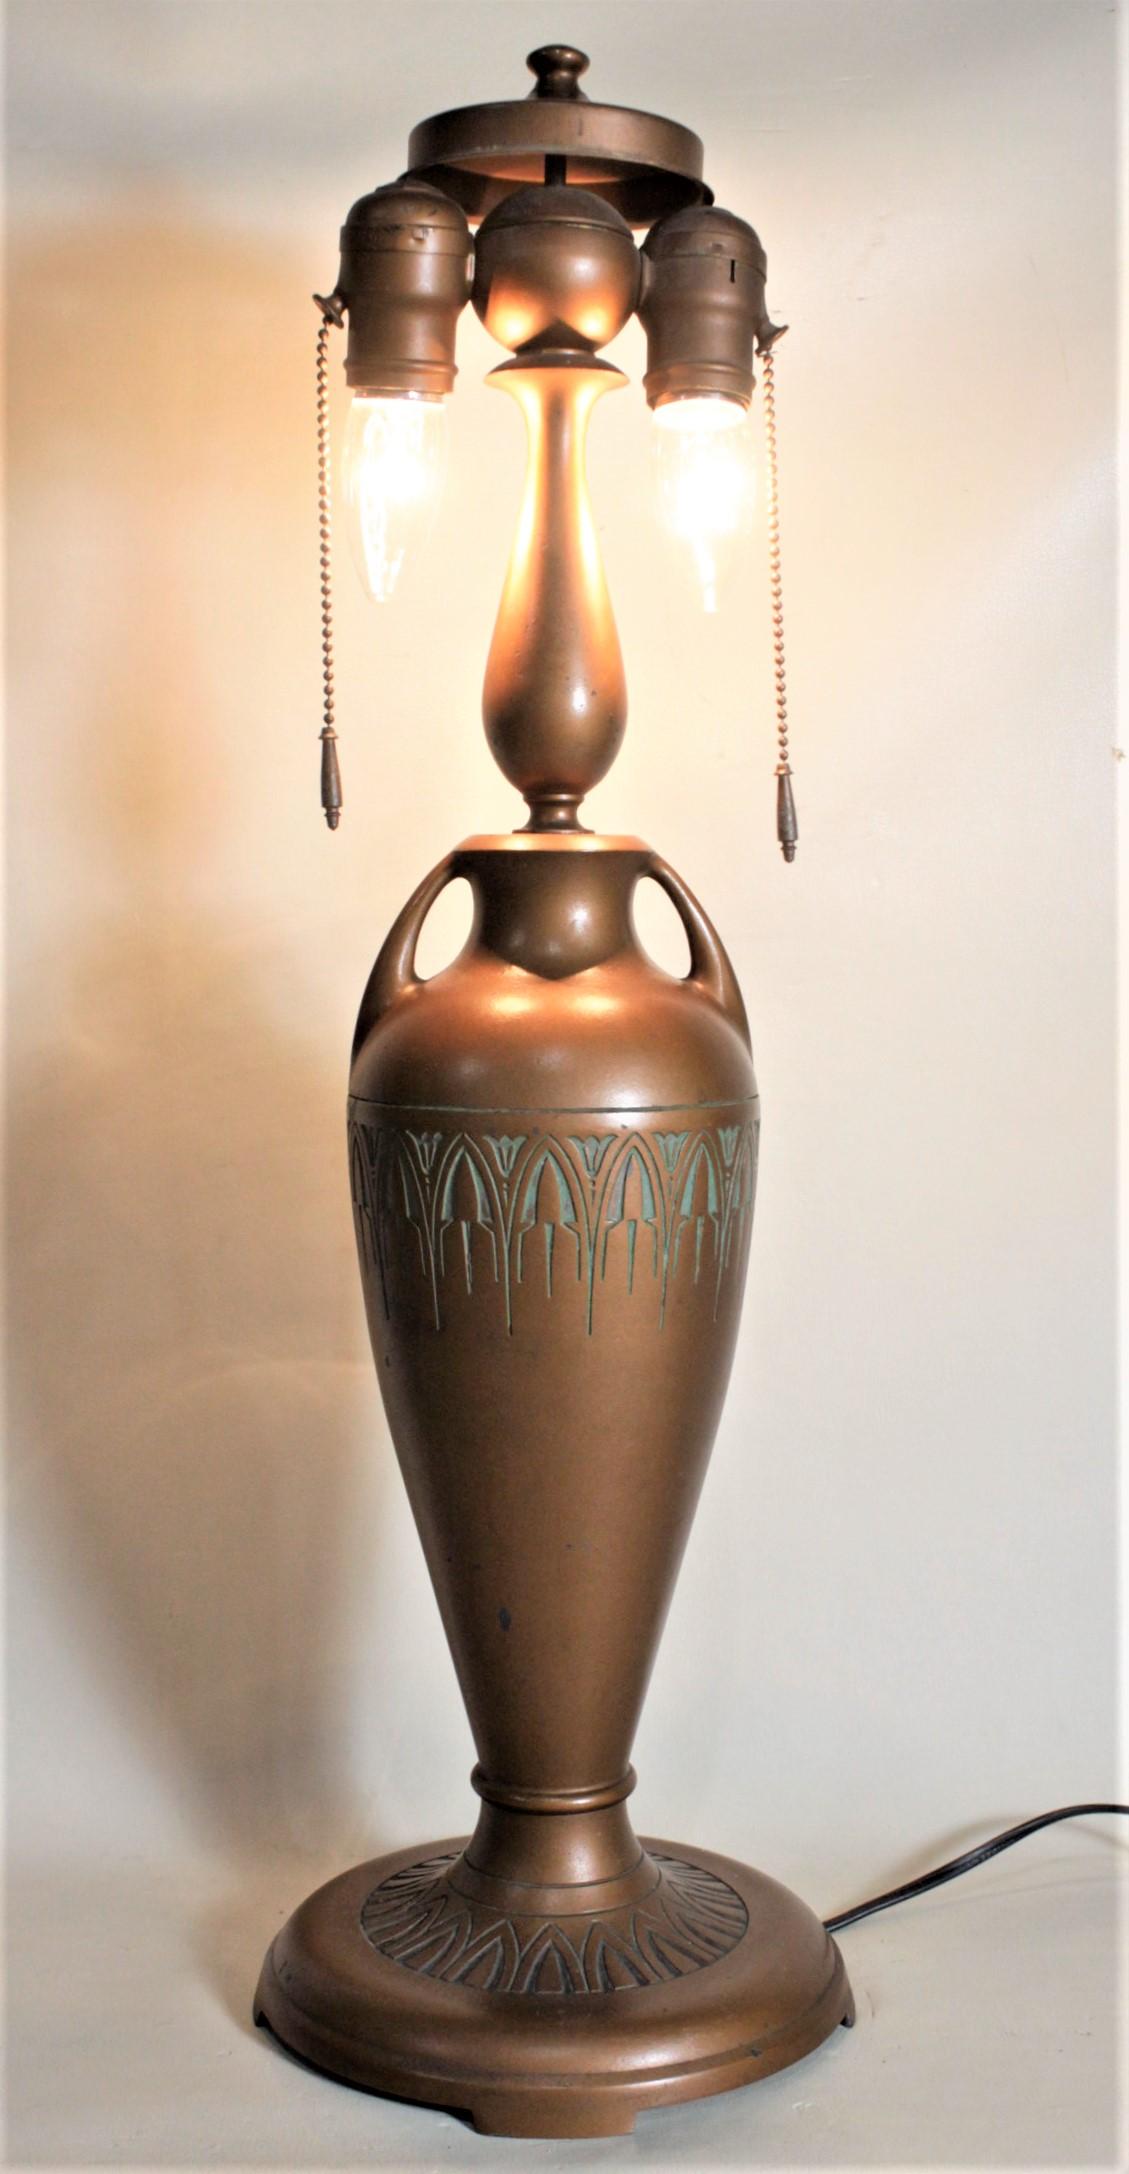 This patinated metal table lamp base was made by the Moe Bridges Company of the United States in approximately 1920 in the Arts & Crafts style. The base has double light sockets at the top with the original pull chains and weights and a nicely